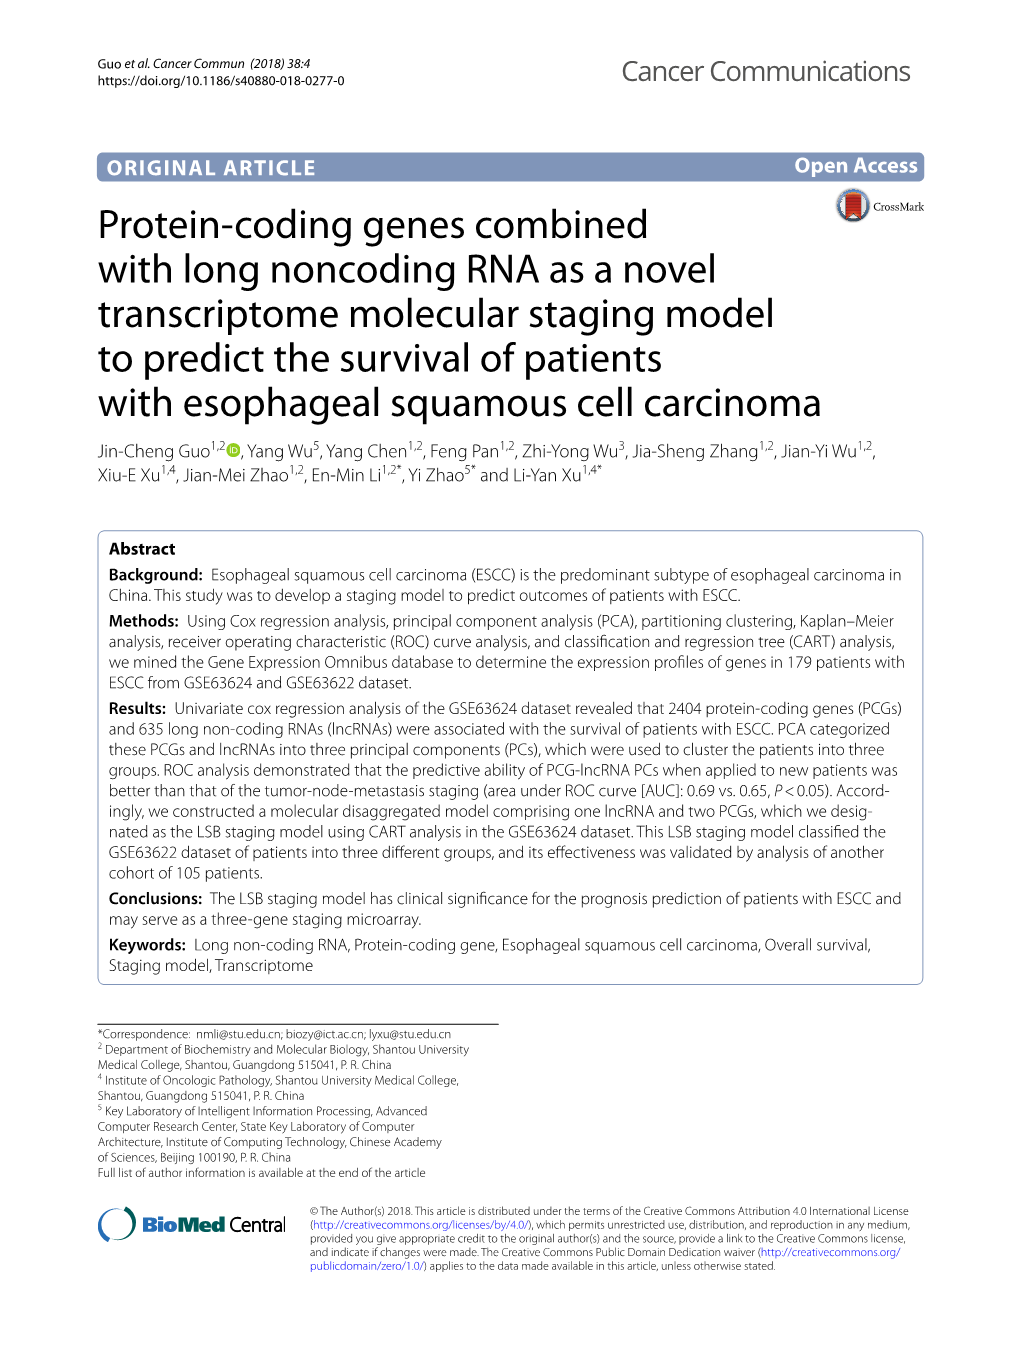 Protein-Coding Genes Combined with Long Noncoding RNA As a Novel